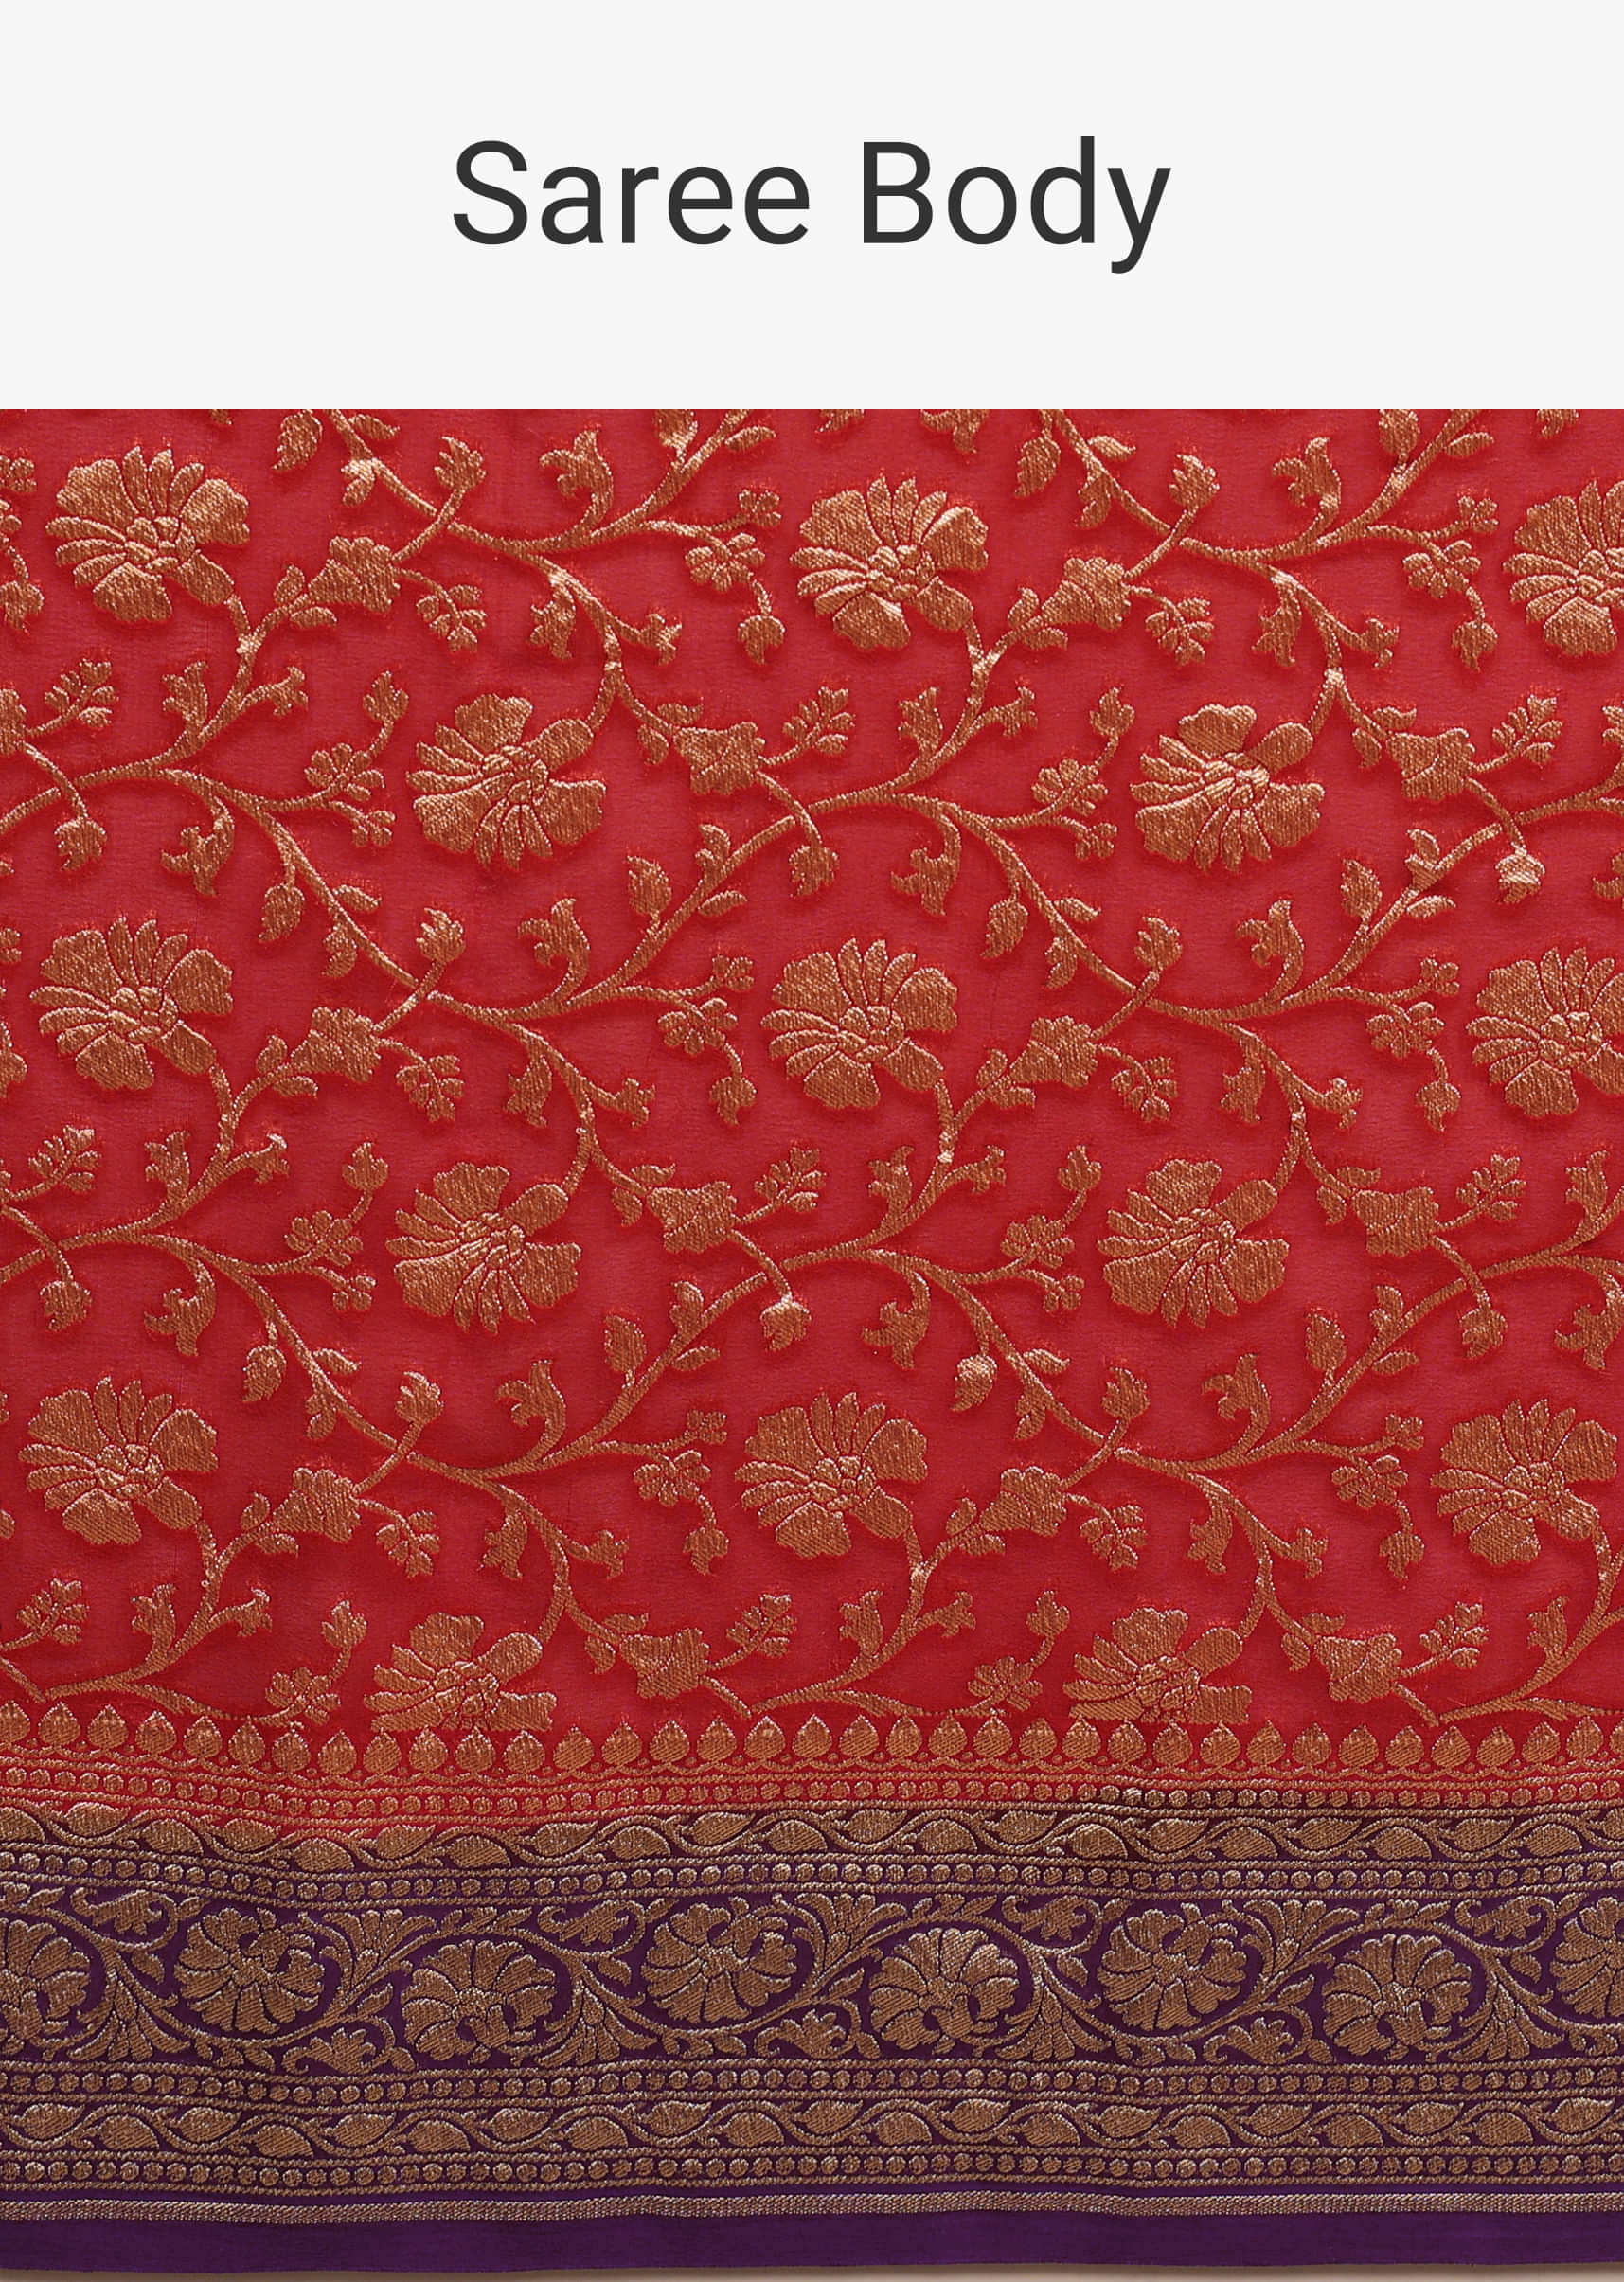 Carmine Red Saree In Georgette With Wine Border And Woven Floral Jaal Work